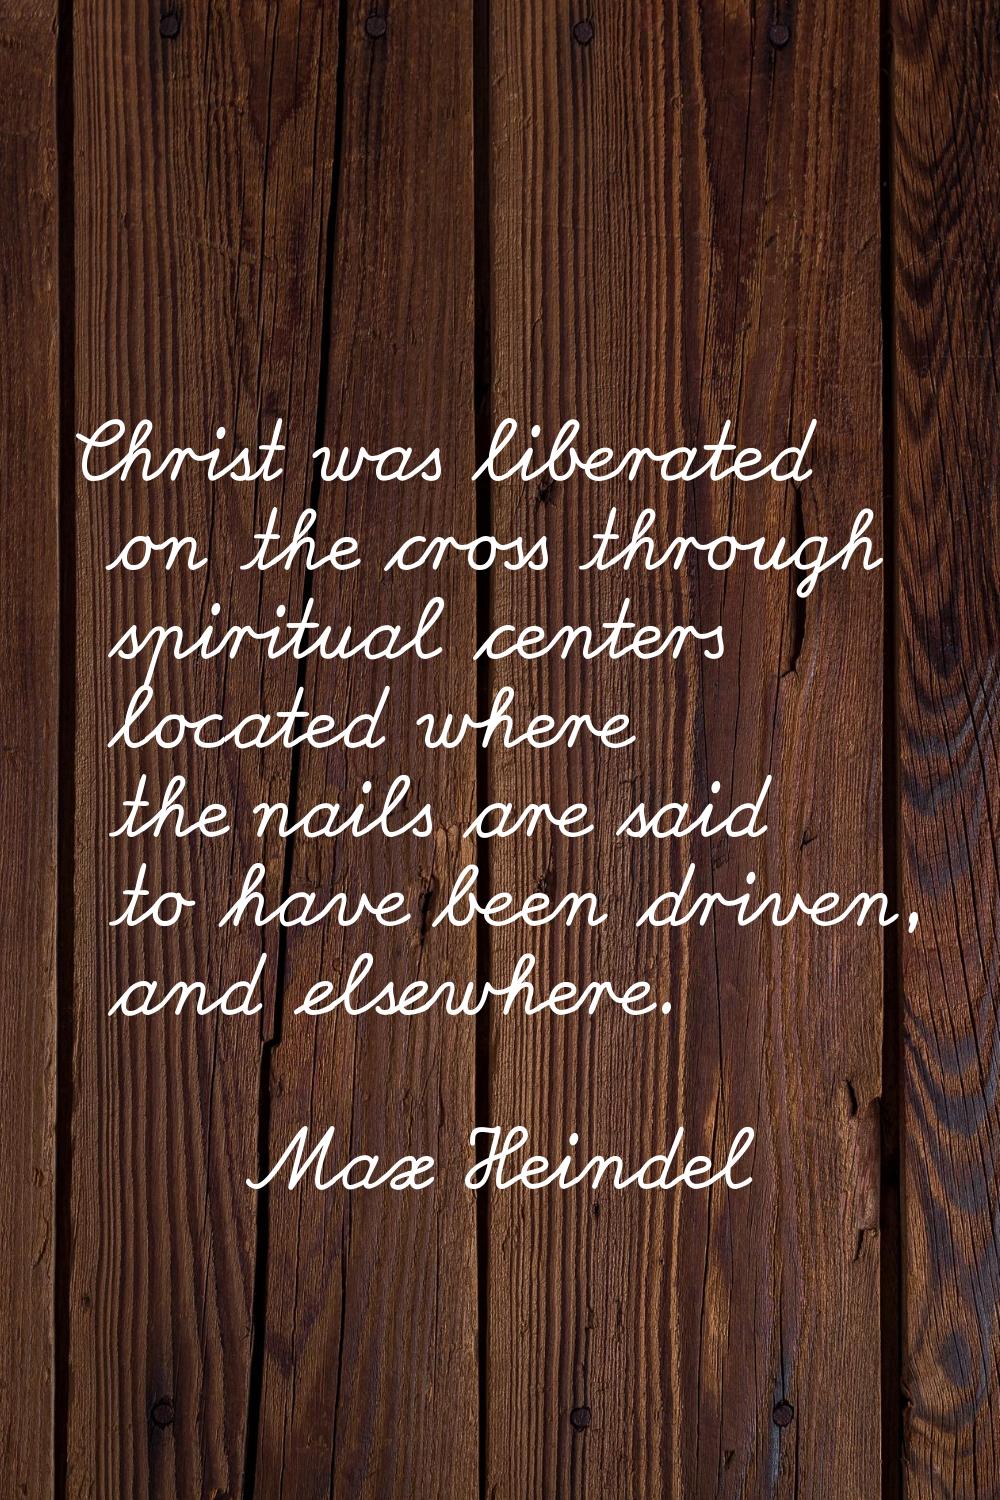 Christ was liberated on the cross through spiritual centers located where the nails are said to hav